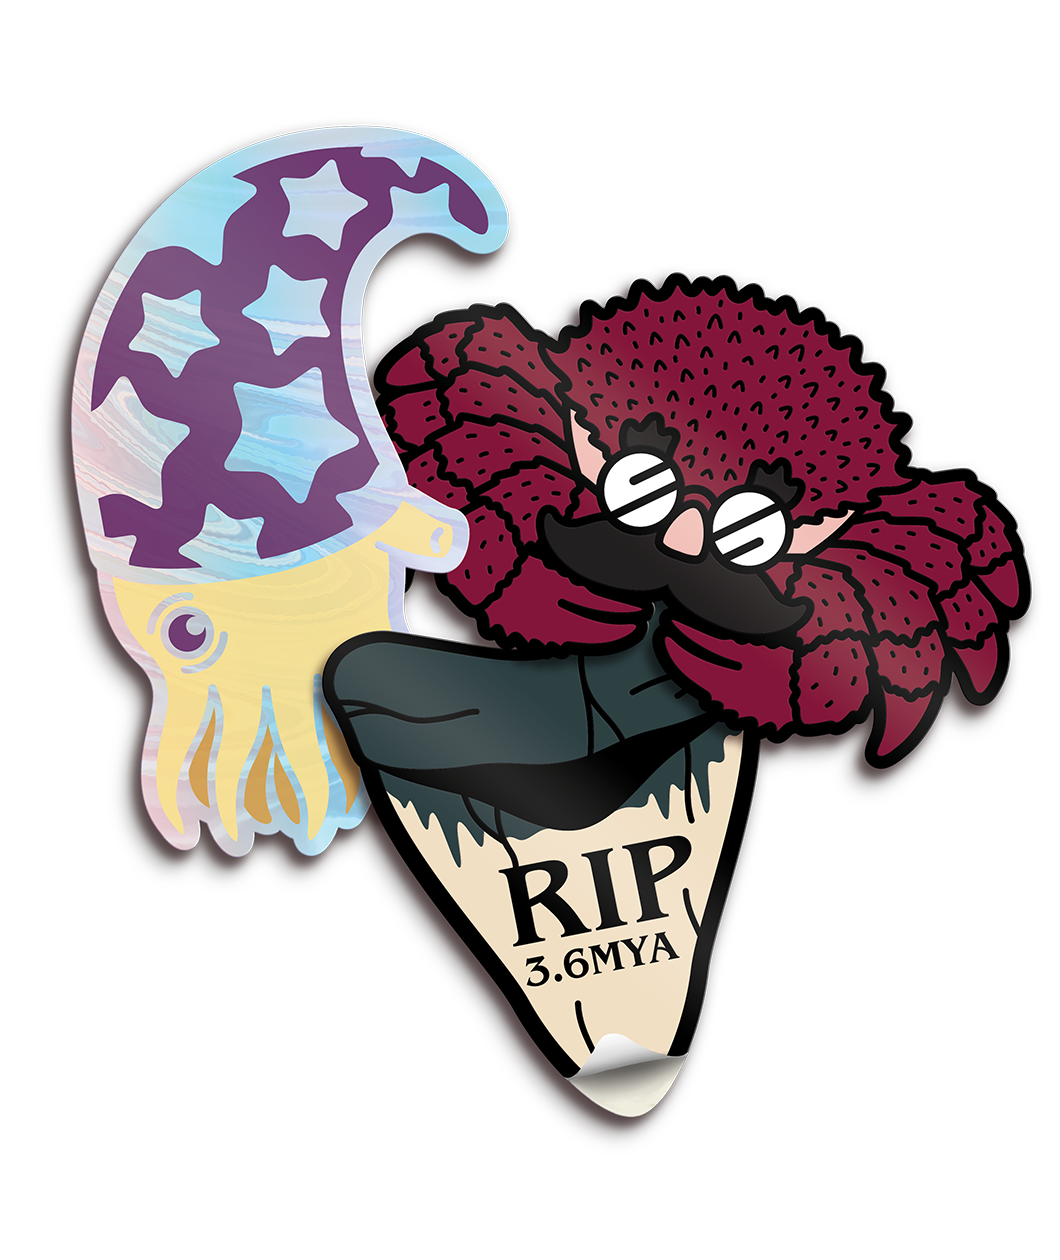 Set of three marine animal stickers. One is of Plectronoceras in a purple wizard hat, a red crab with a fake mustache and glasses, and a megaladon tooth with “RIP 3.6MYA” in black font on it - from Eons